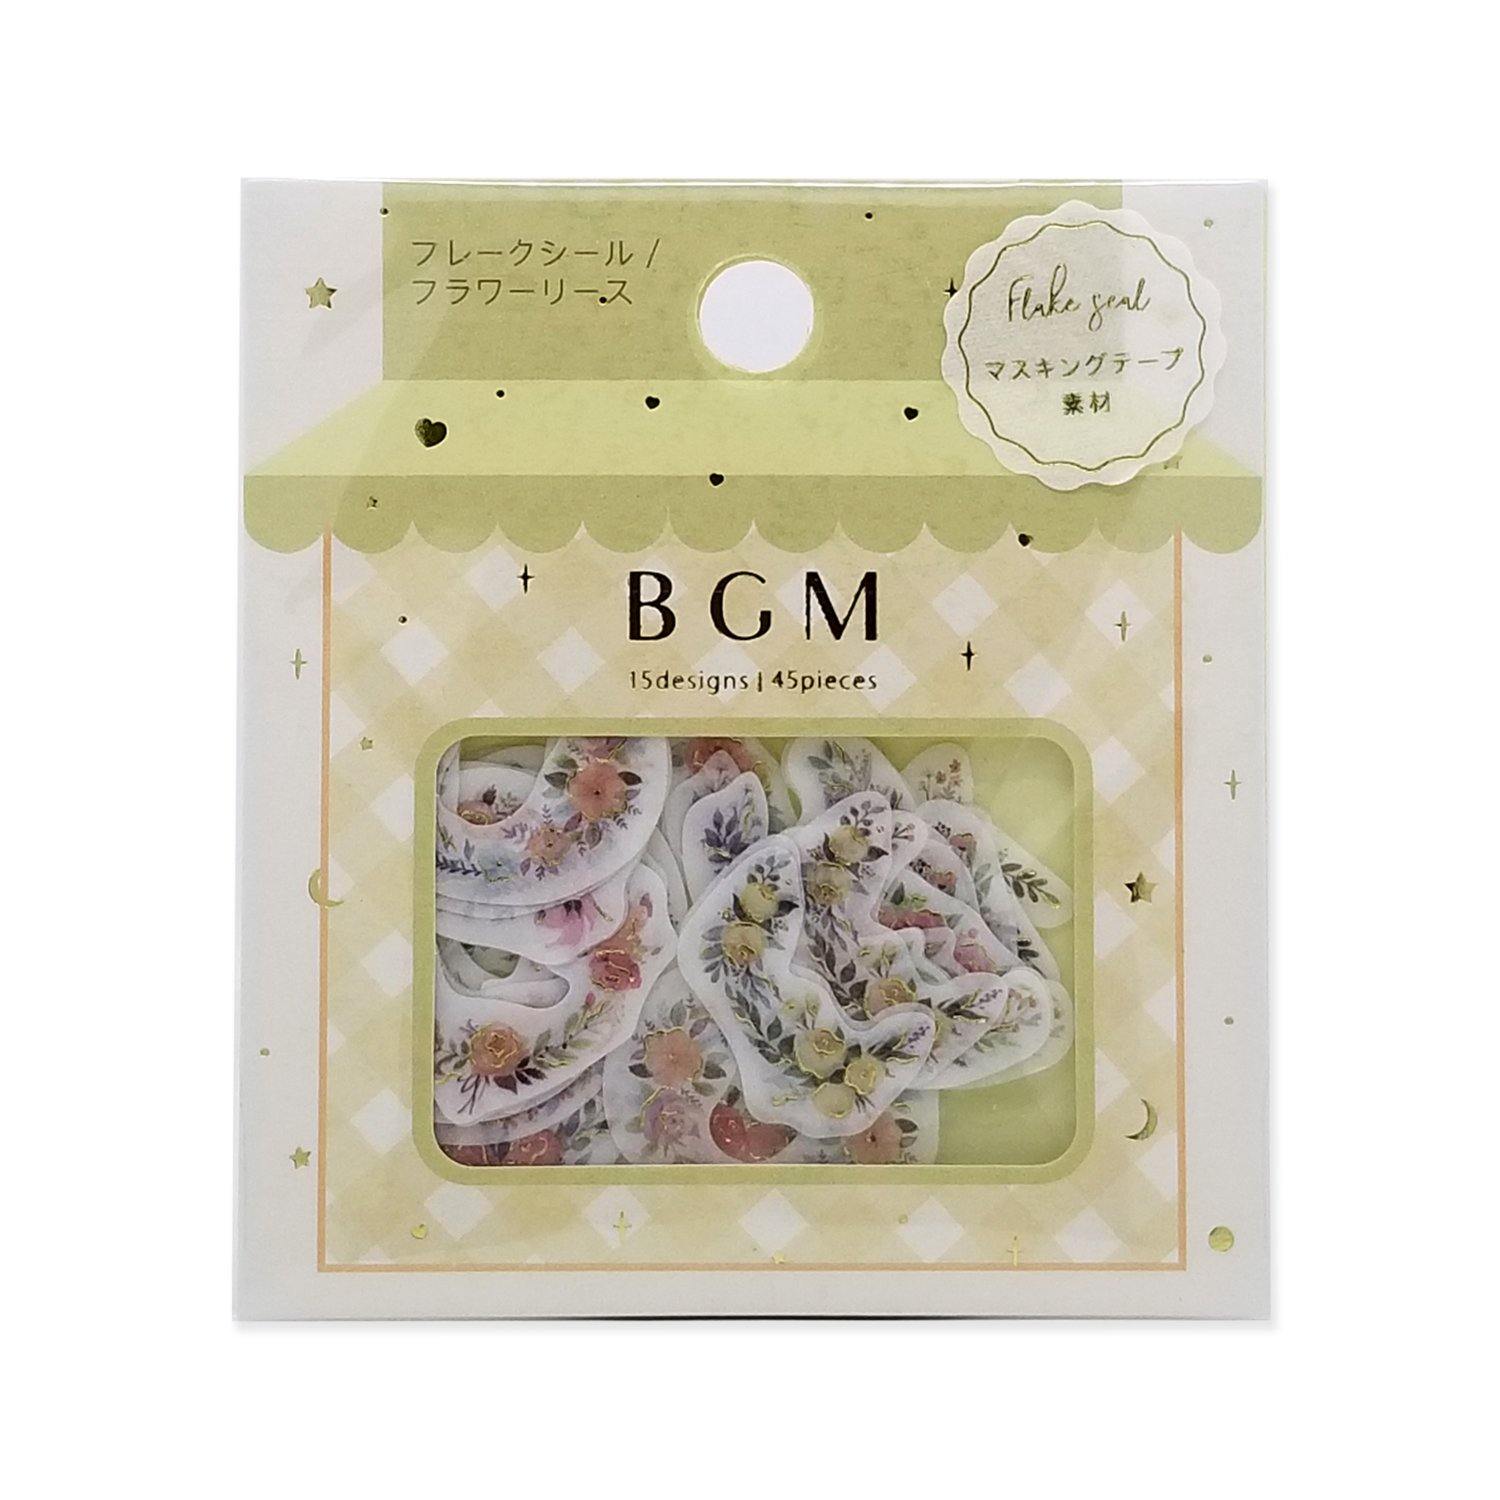 BGM Flowers and Birds Flakes Seal